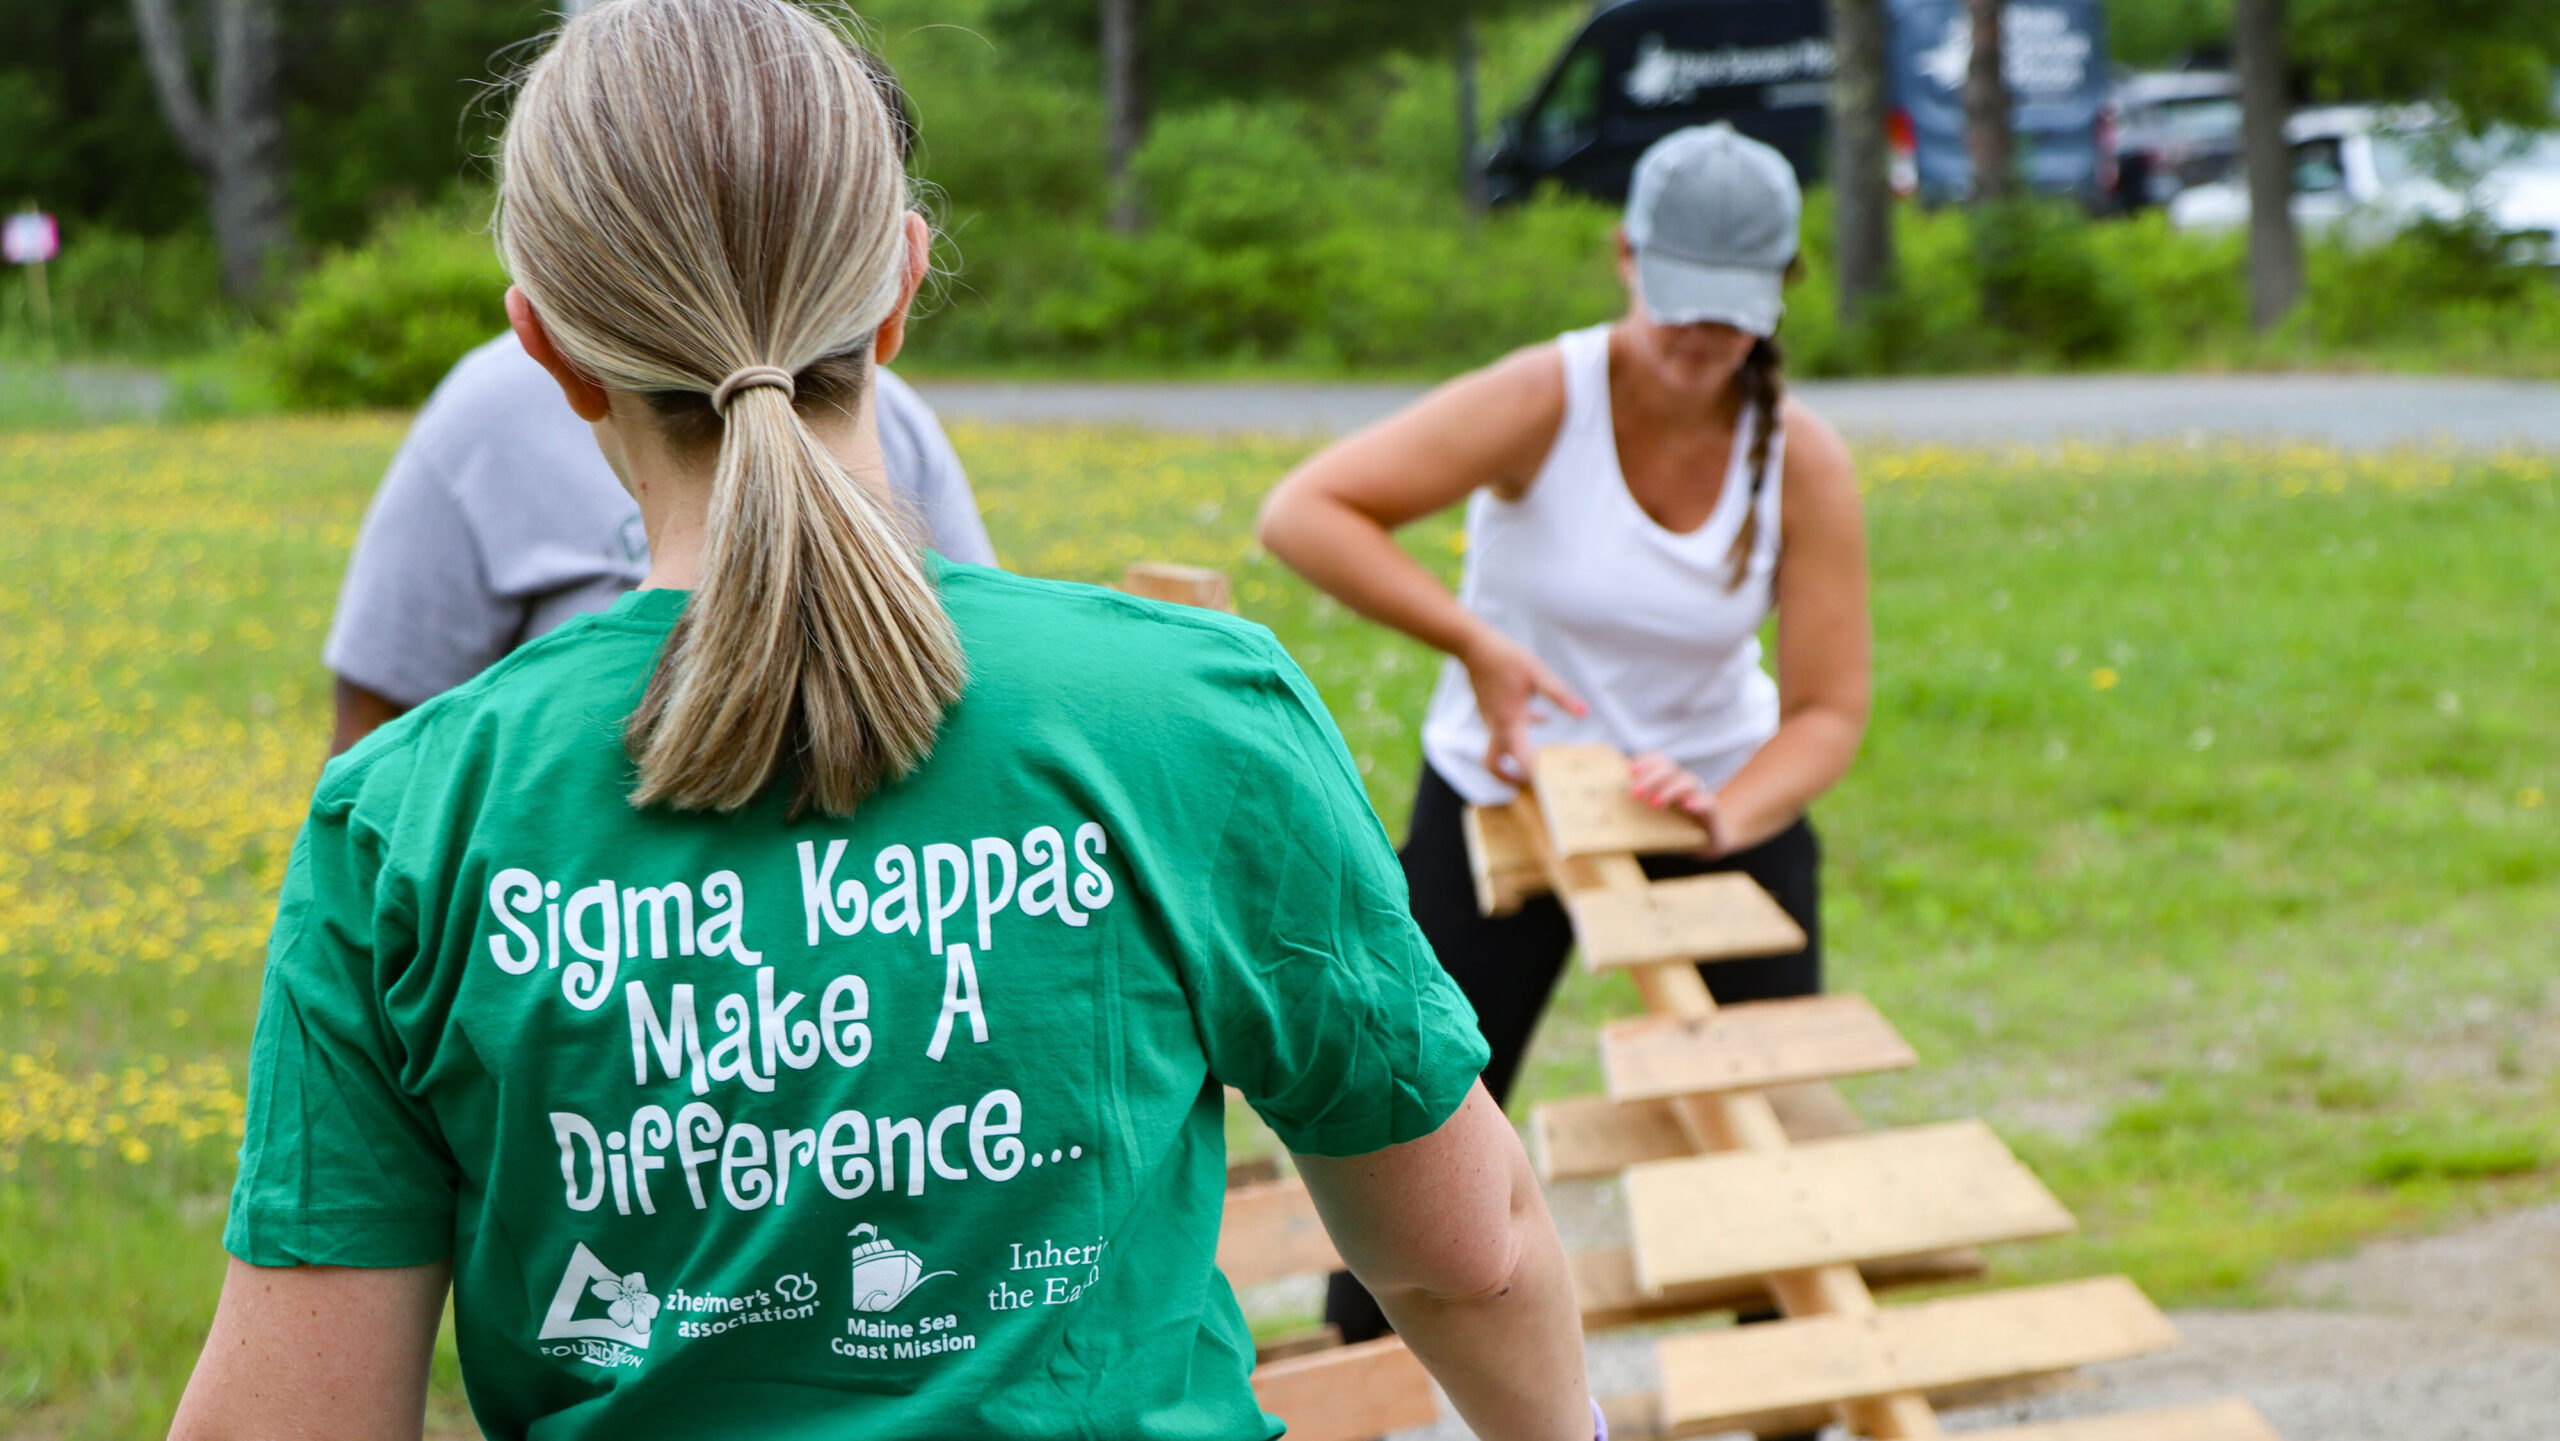 Photo of three people with one wearing a shirt that says "Sigma Kappas make a difference" with the Mission's logo